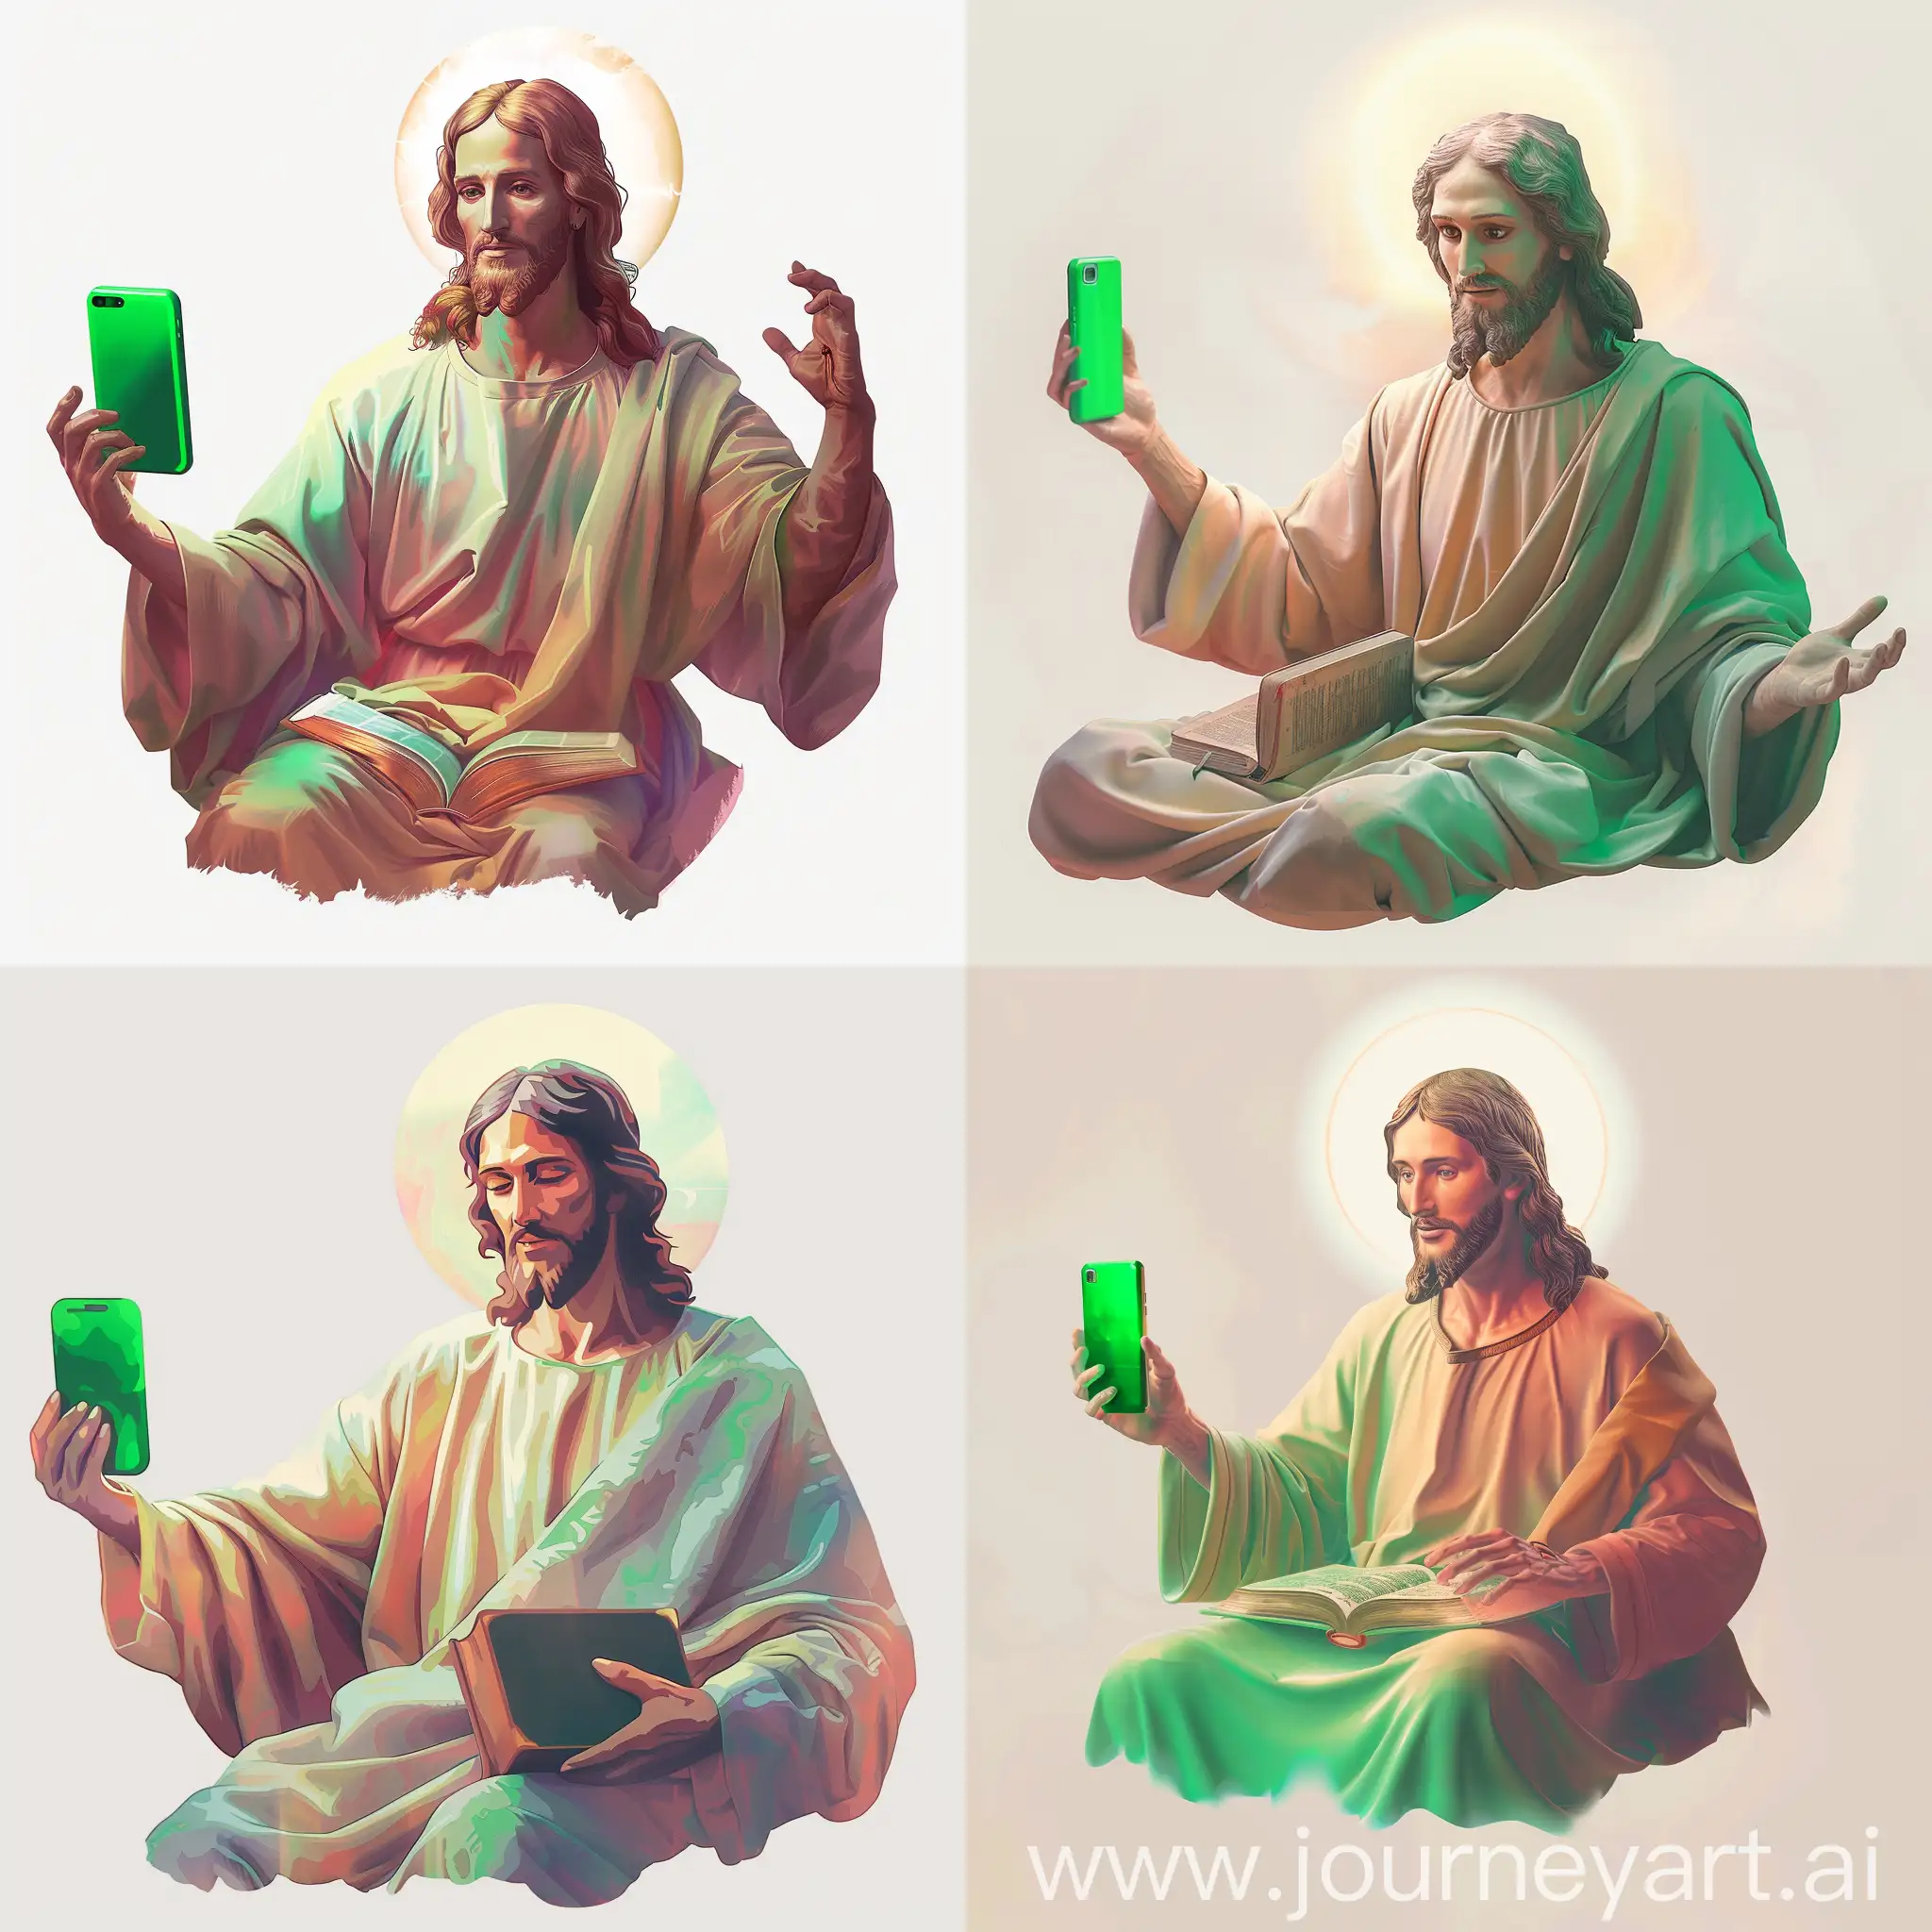 https://www.divino.ai/_next/static/media/f5QKz6MN3228572Wie8Transformed2Png.4d22ead1.png The overall color palette should consist of soft hues with white (#FFFFFF) background and no corners.

The figure of Jesus Christ, stylized yet identifiable, is placed on the center of the image. He is seated comfortably, dressed in a simple robe filled with calming, earthy tones.  His hands rest gently on the bible in his lap. Nobody else can be seen.

His face, larger than in the previous version, takes up a good portion of the center-right of the image. His eyes are clear and kind, looking directly towards the viewer, establishing a strong visual connection.

A soft, warm light illuminates his face, subtly forming a halo around his head. The light is more pronounced on his face, highlighting his peaceful and inviting expression.

Add a detail of one hand raised slightly, the palm open and facing the viewer, in a calming and welcoming gesture while holding a green smartphone.

The image should be void of unnecessary details to keep the focus on the figure of Jesus Christ, portraying him as a therapist in a modern, stylized, yet relatable manner. 